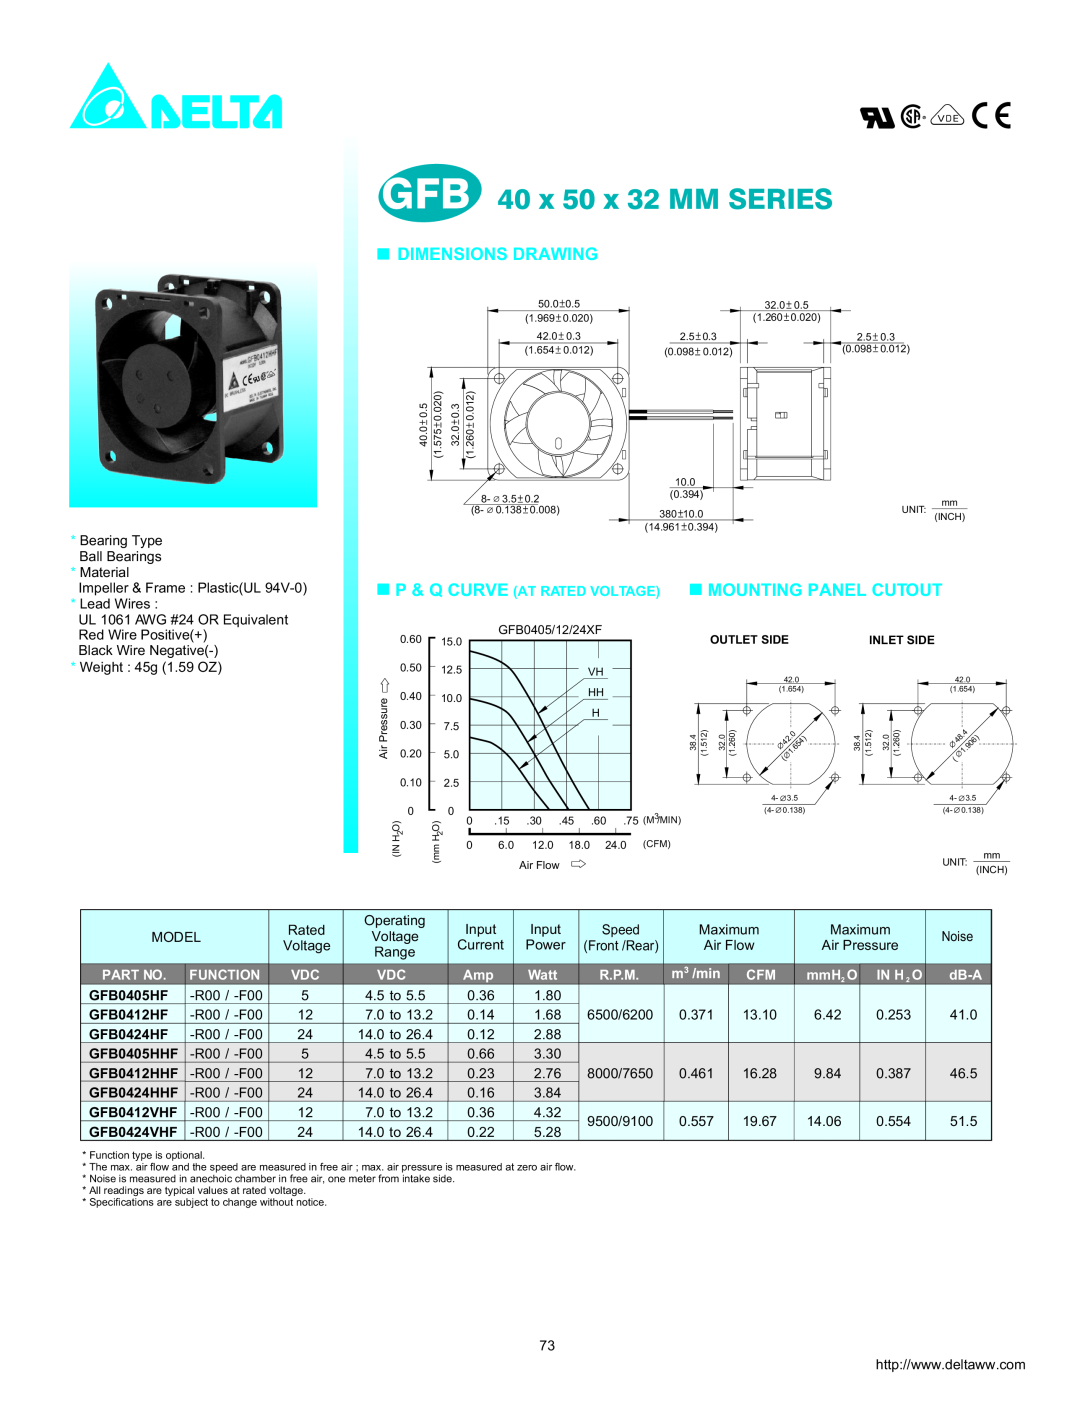 Delta Electronics GFB0412HHF dimensions GFB 40 x 50 x 32 MM SERIES, Dimensions Drawing, Mounting Panel Cutout, Function 